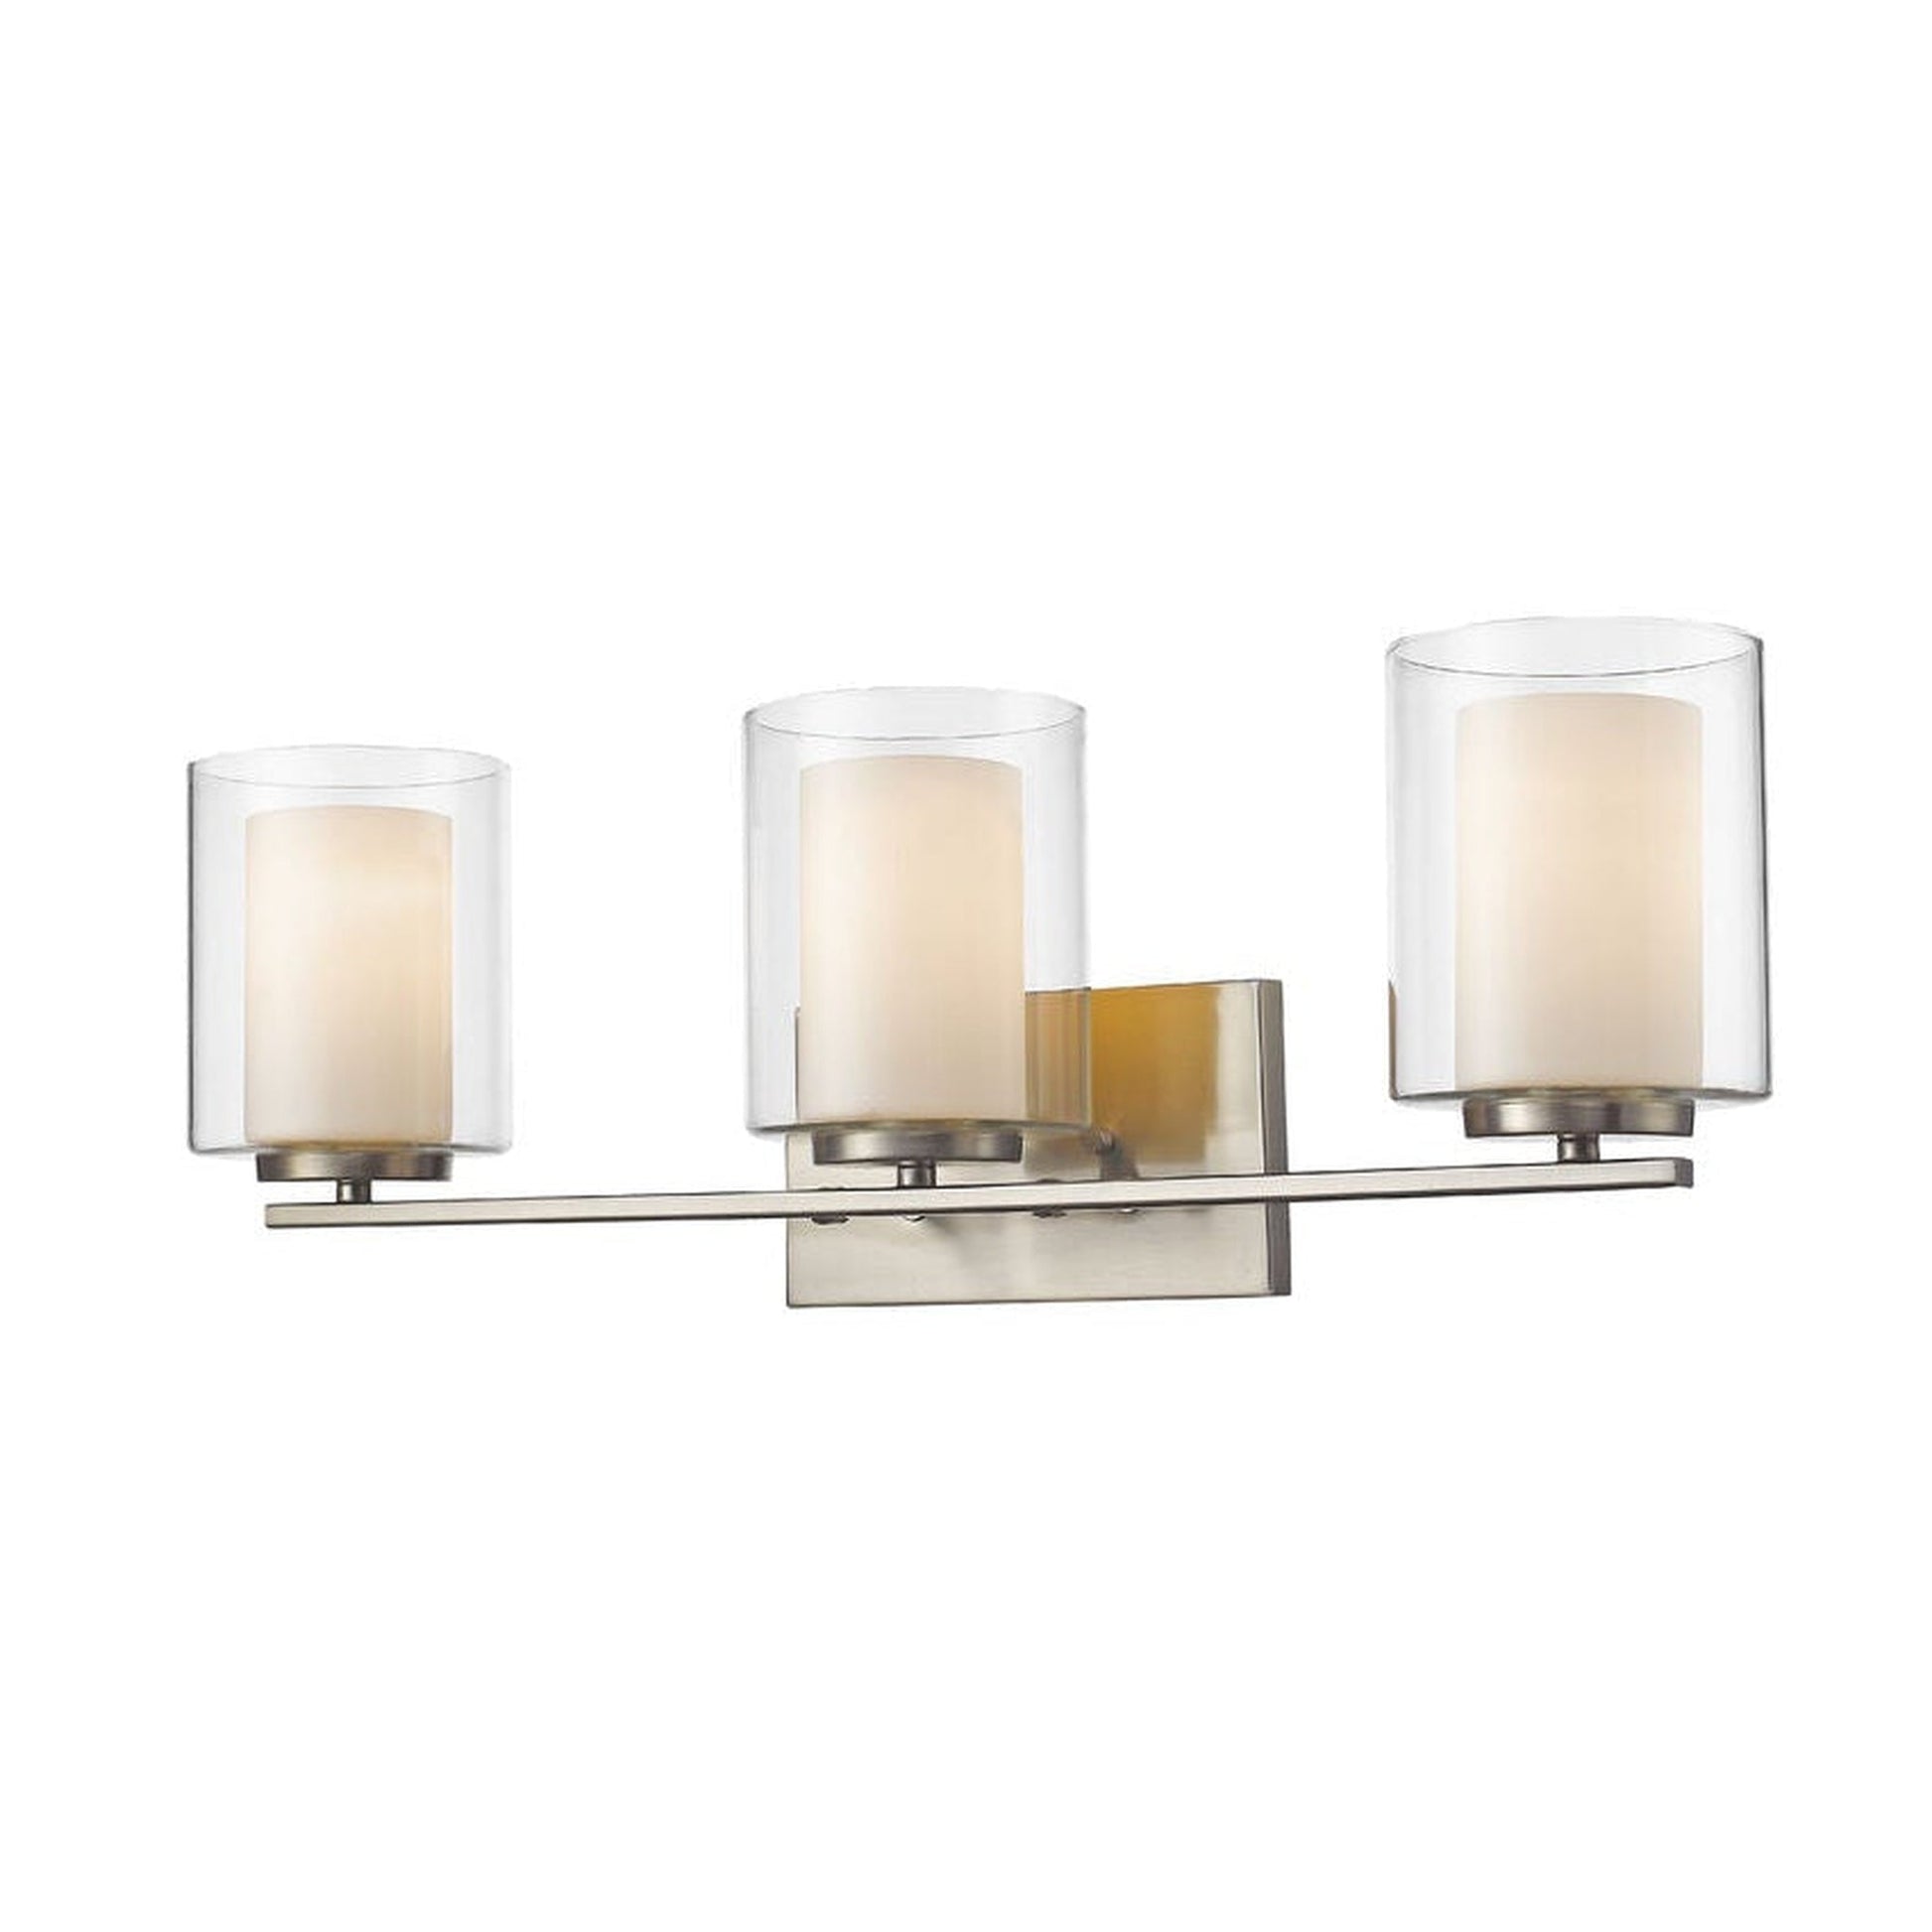 Z-Lite Willow 24" 3-Light Brushed Nickel Vanity Light With Clear and Matte Opal Glass Shade